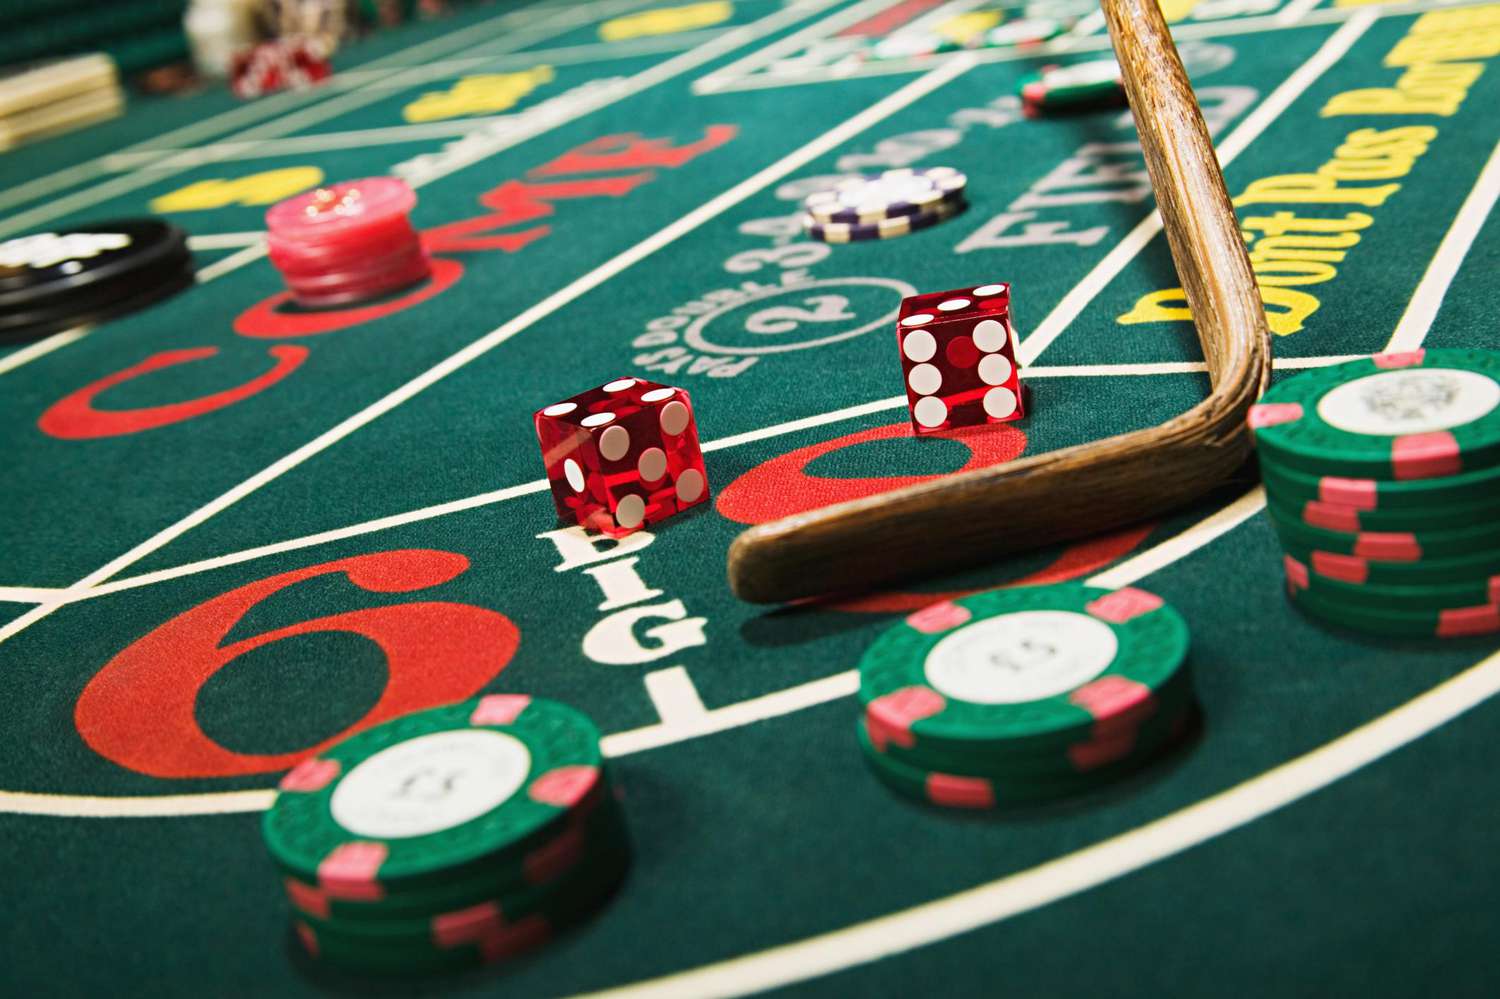 How Good is Your Craps Game?